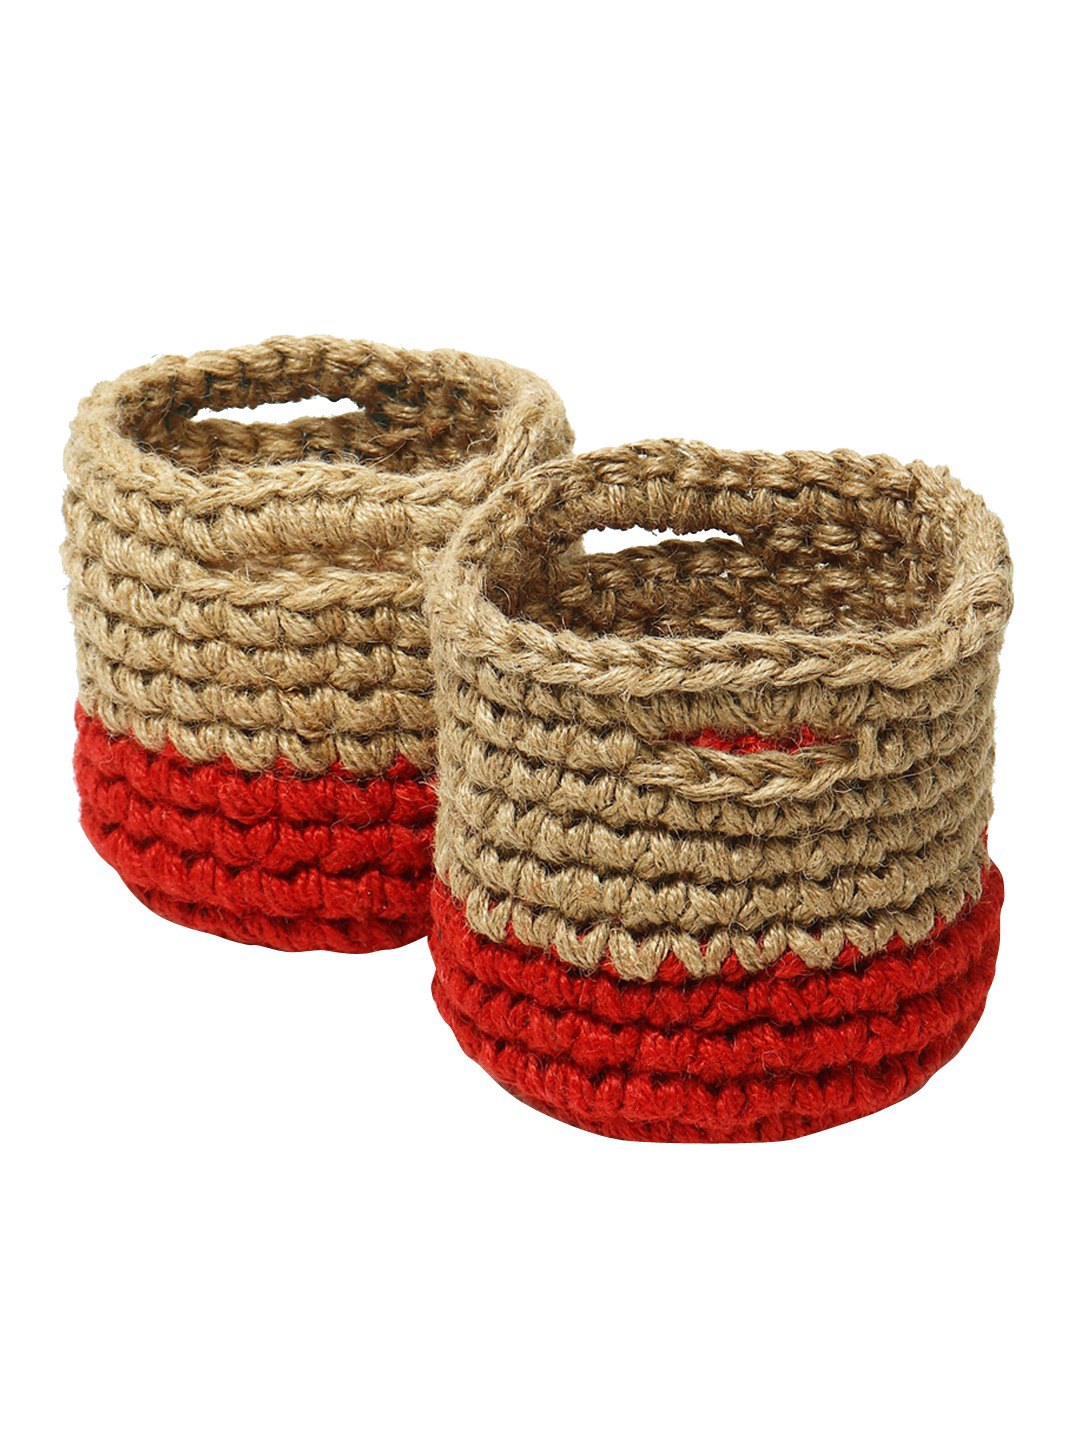 Red and Brown Set of 2 Color blocked Jute Crochet Baskets